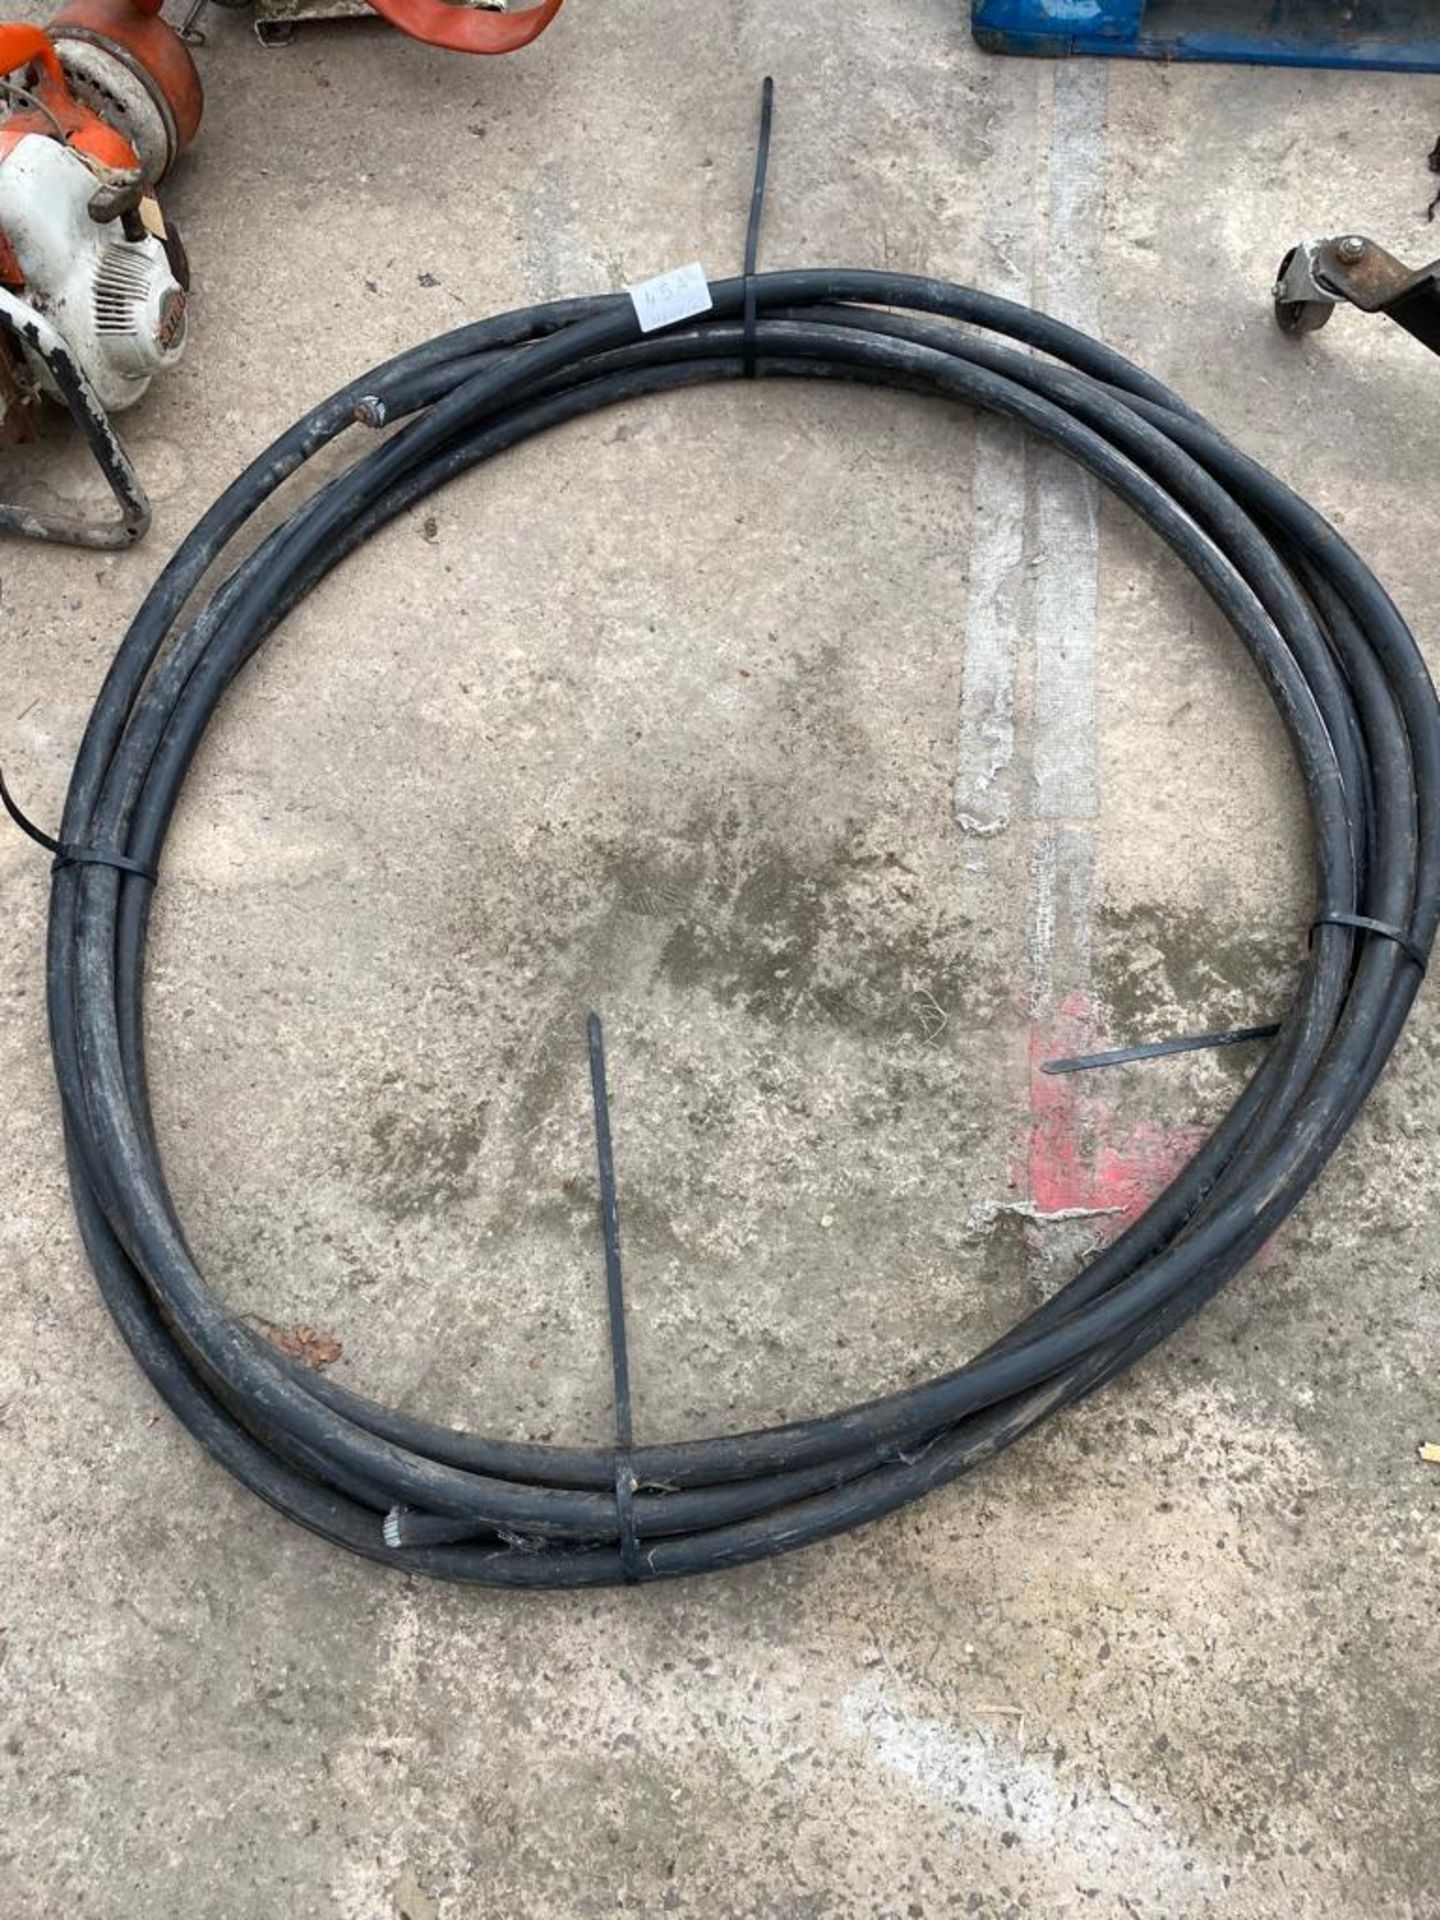 APPROXIMATELY 15 METRES OF THICK ARMORED CABLE - NO VAT